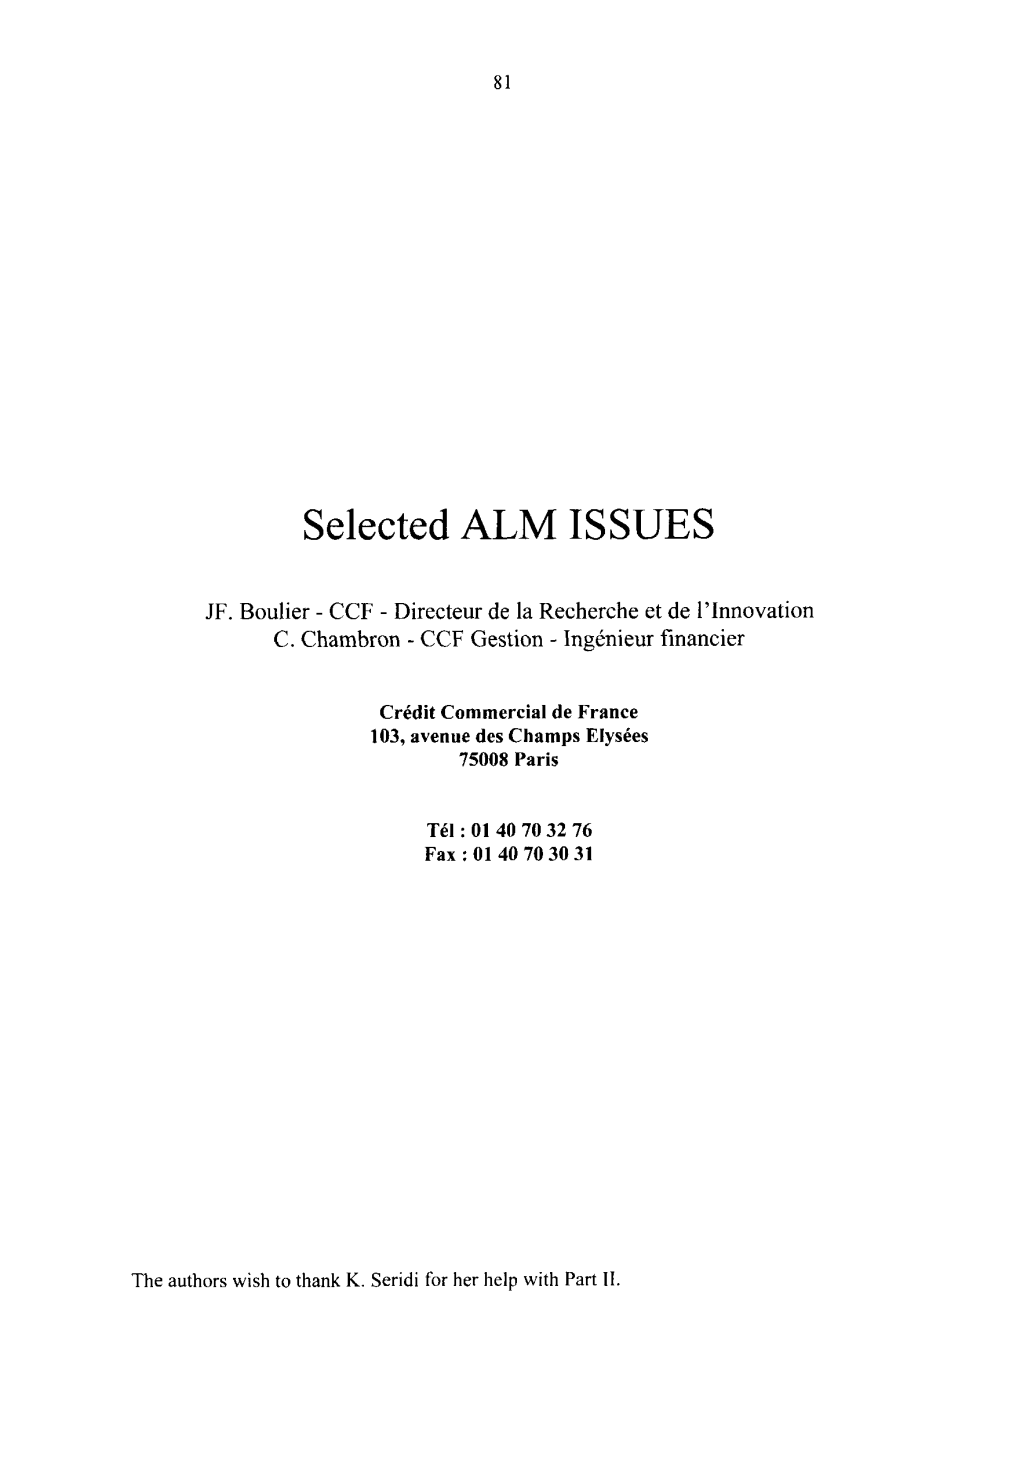 Selected ALM ISSUES